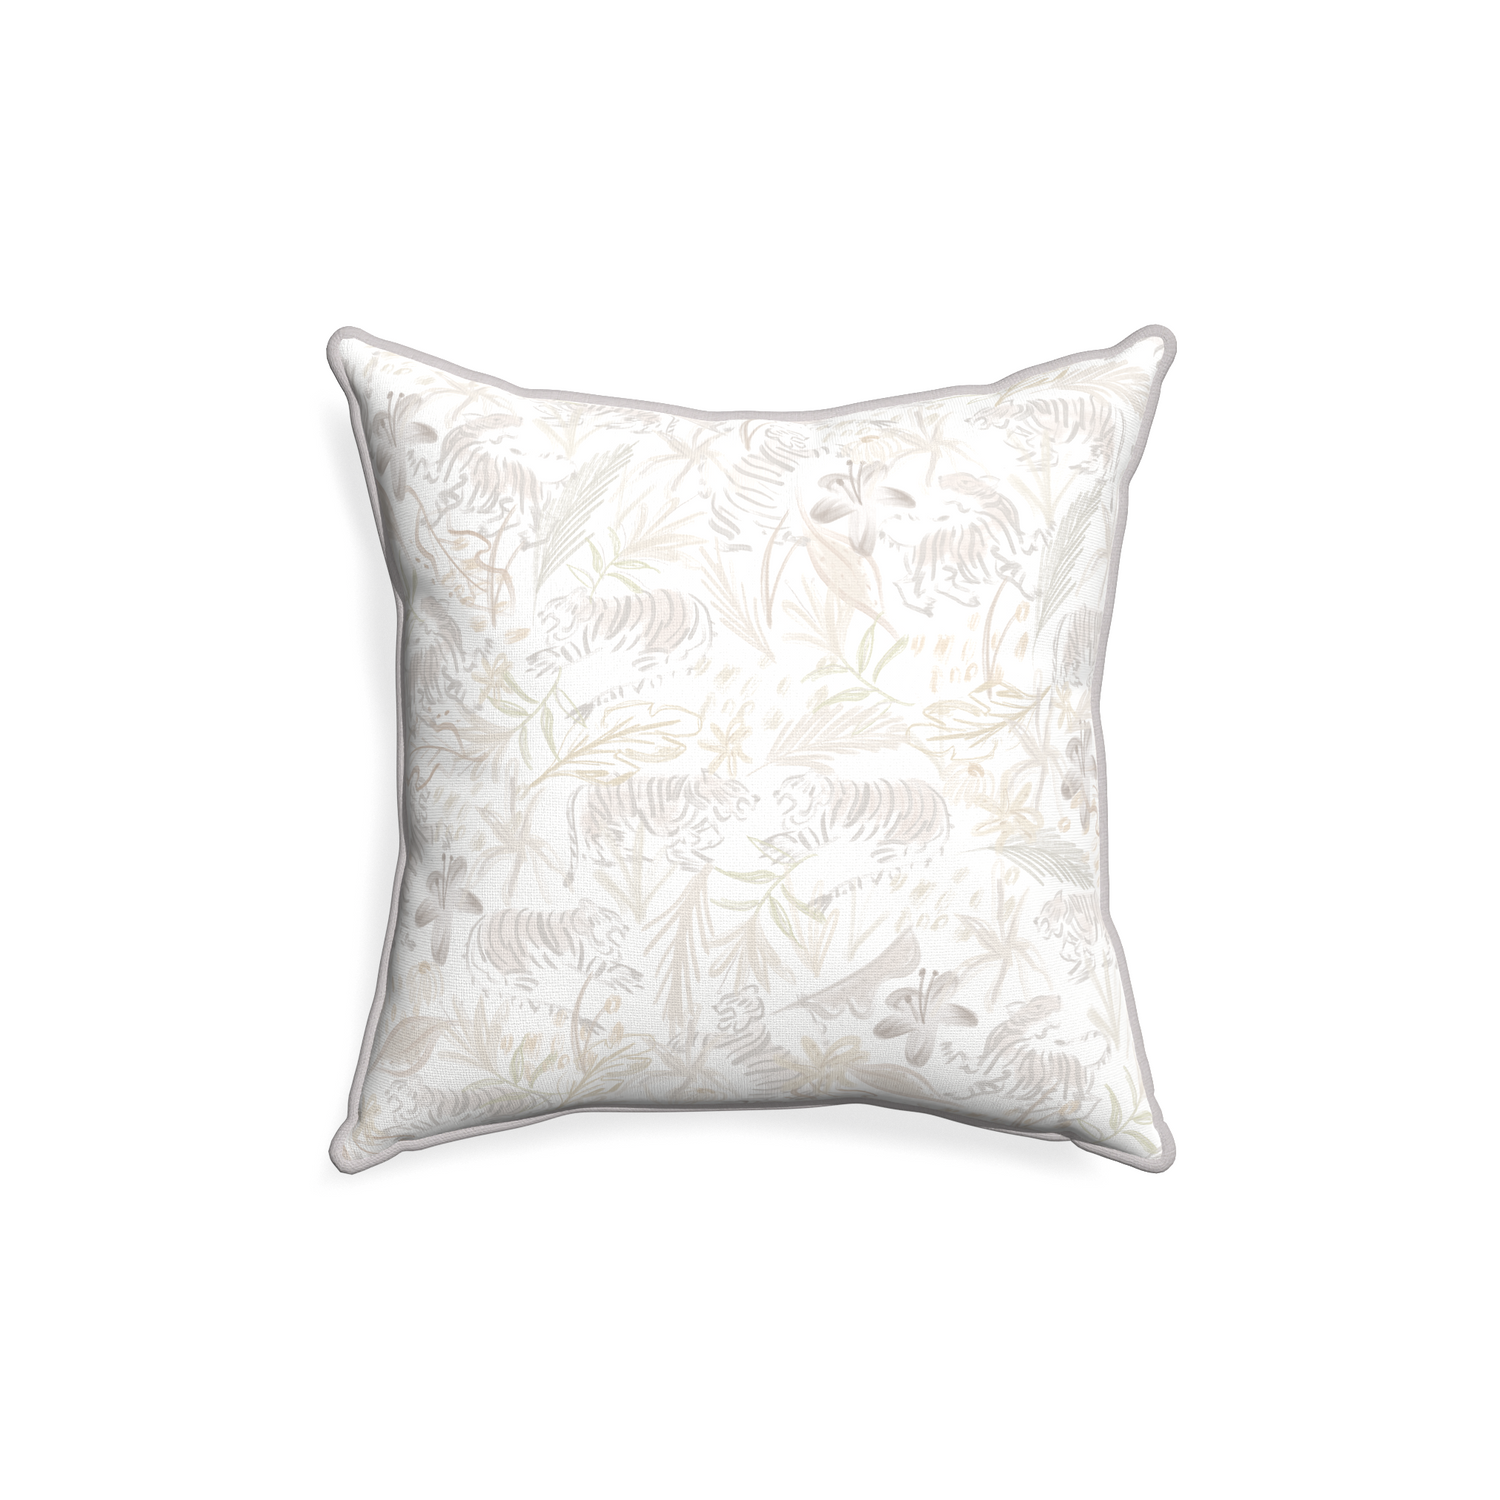 18-square frida sand custom pillow with pebble piping on white background